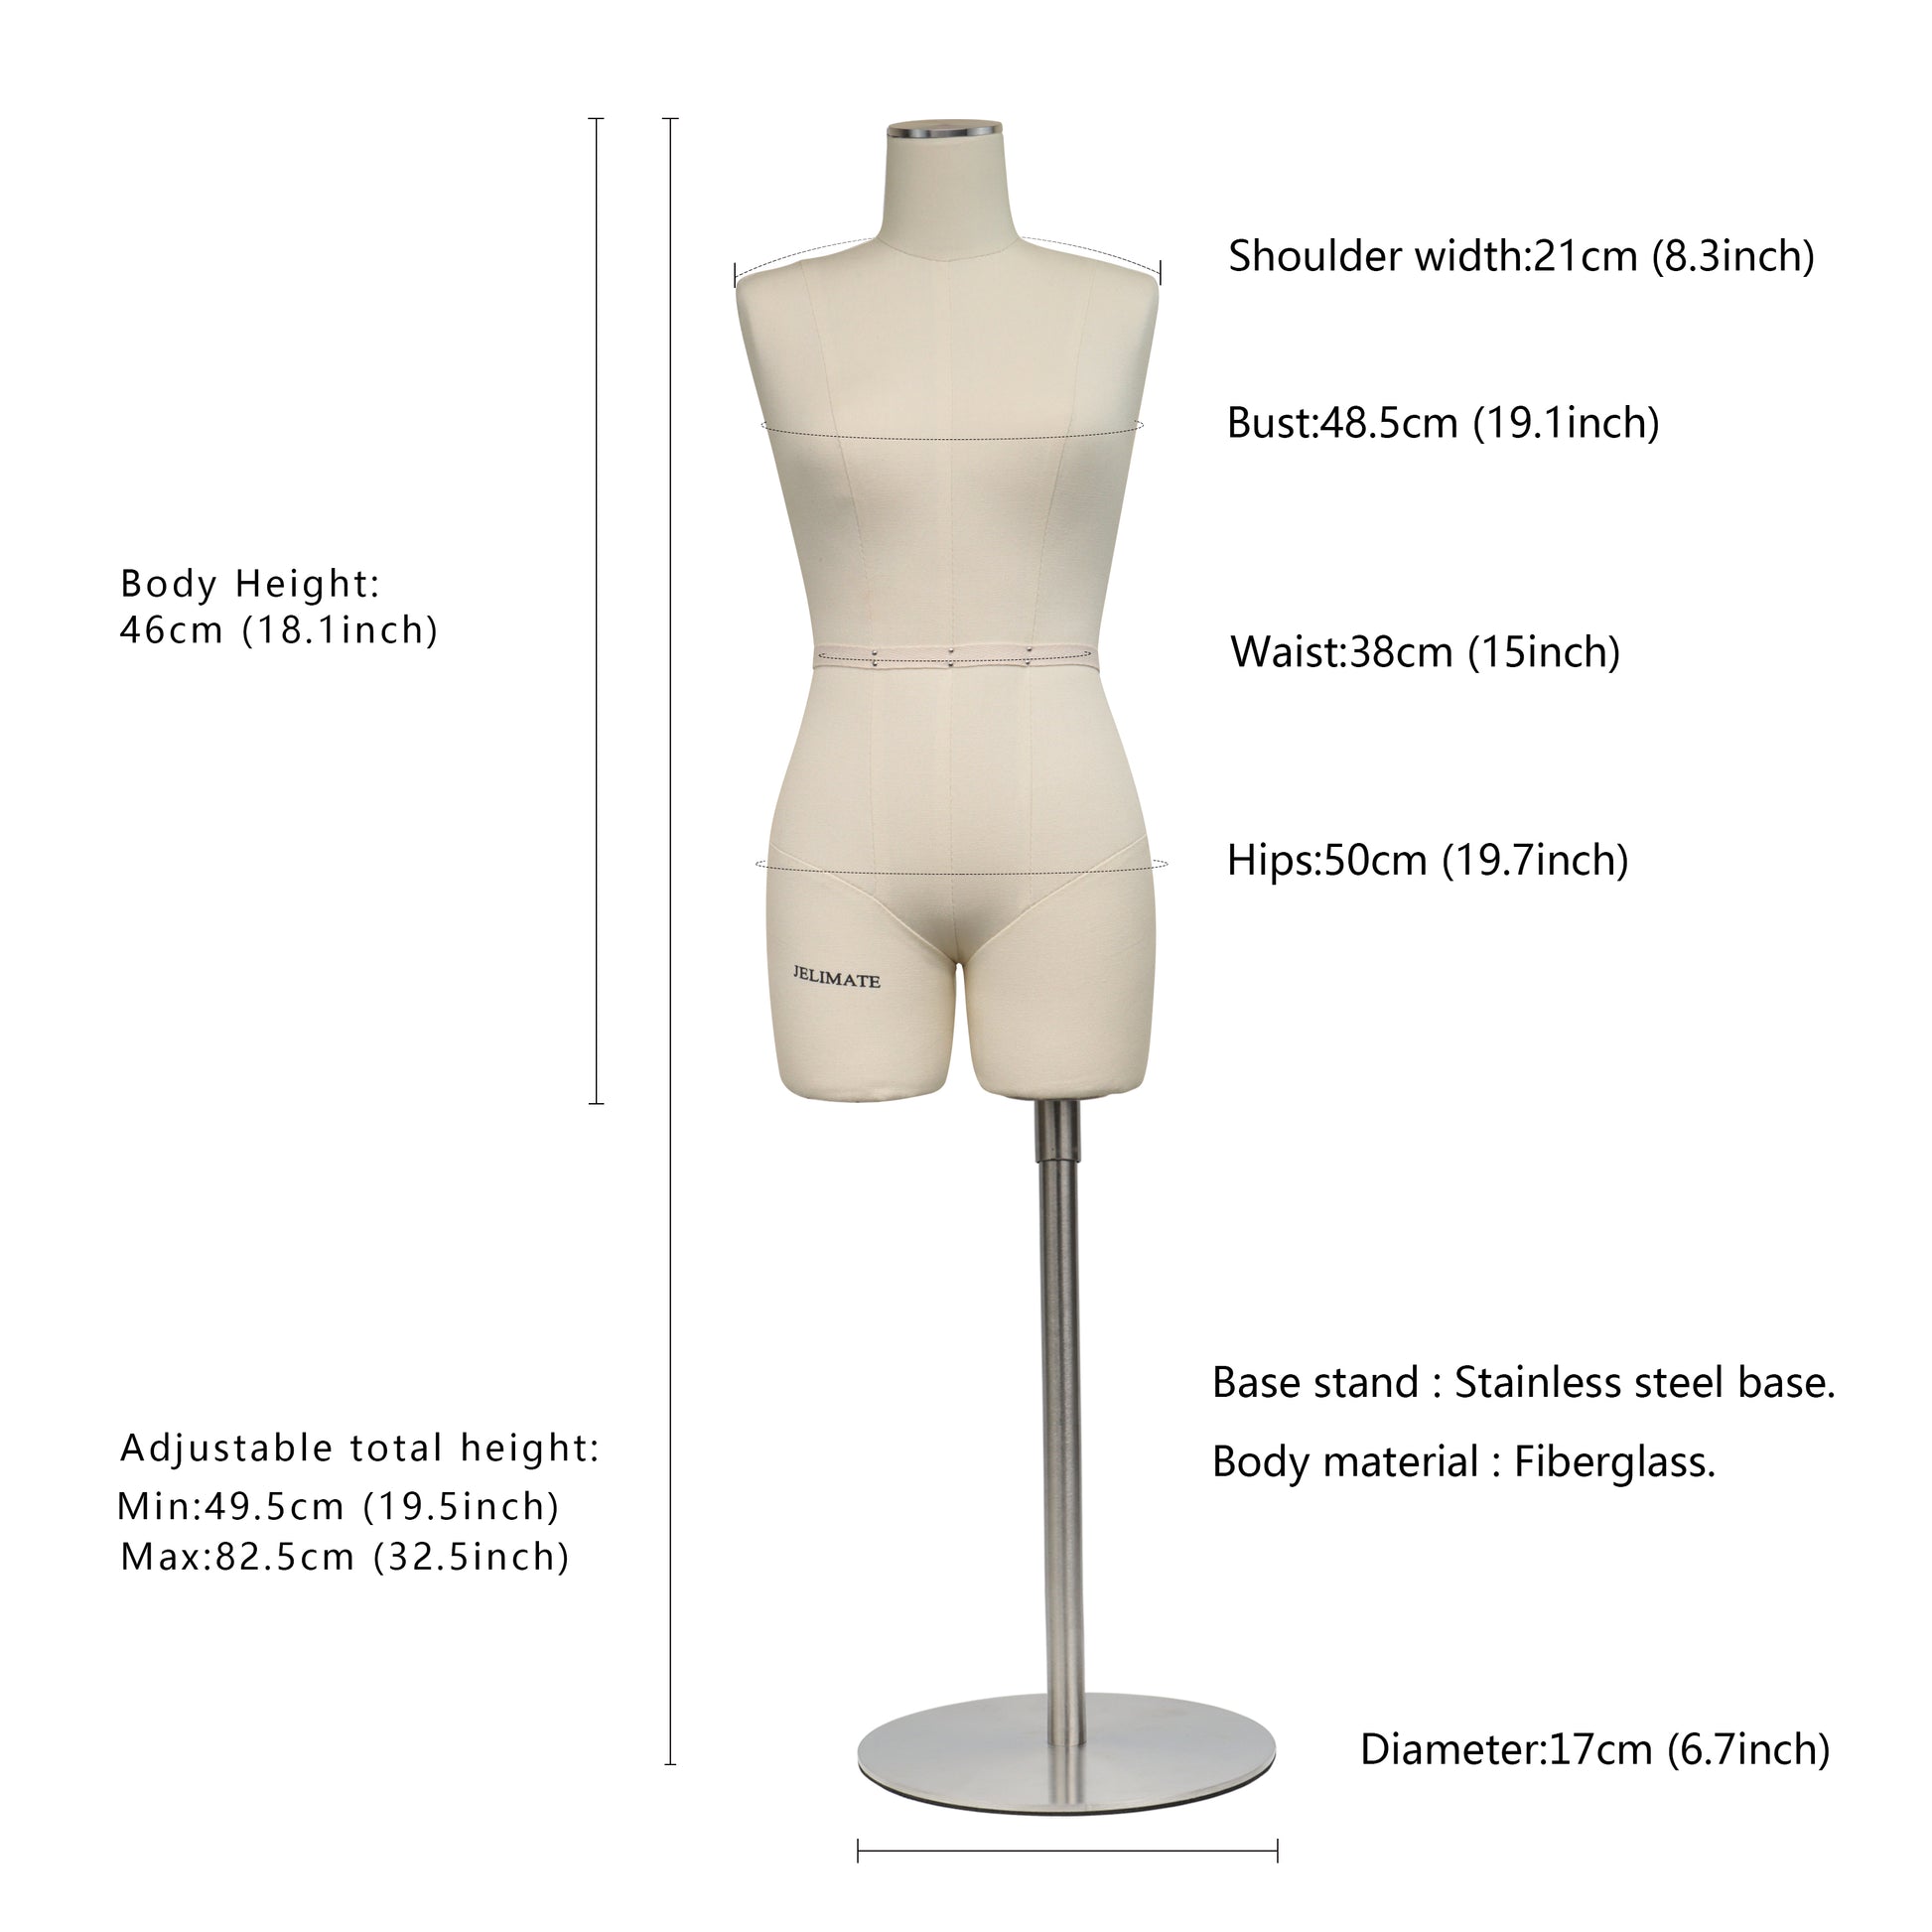 Female Full Body Tailor Dress Form Professional Standard Dressmaker Dummy  for Sewing - China Dress Form and Mannequin price